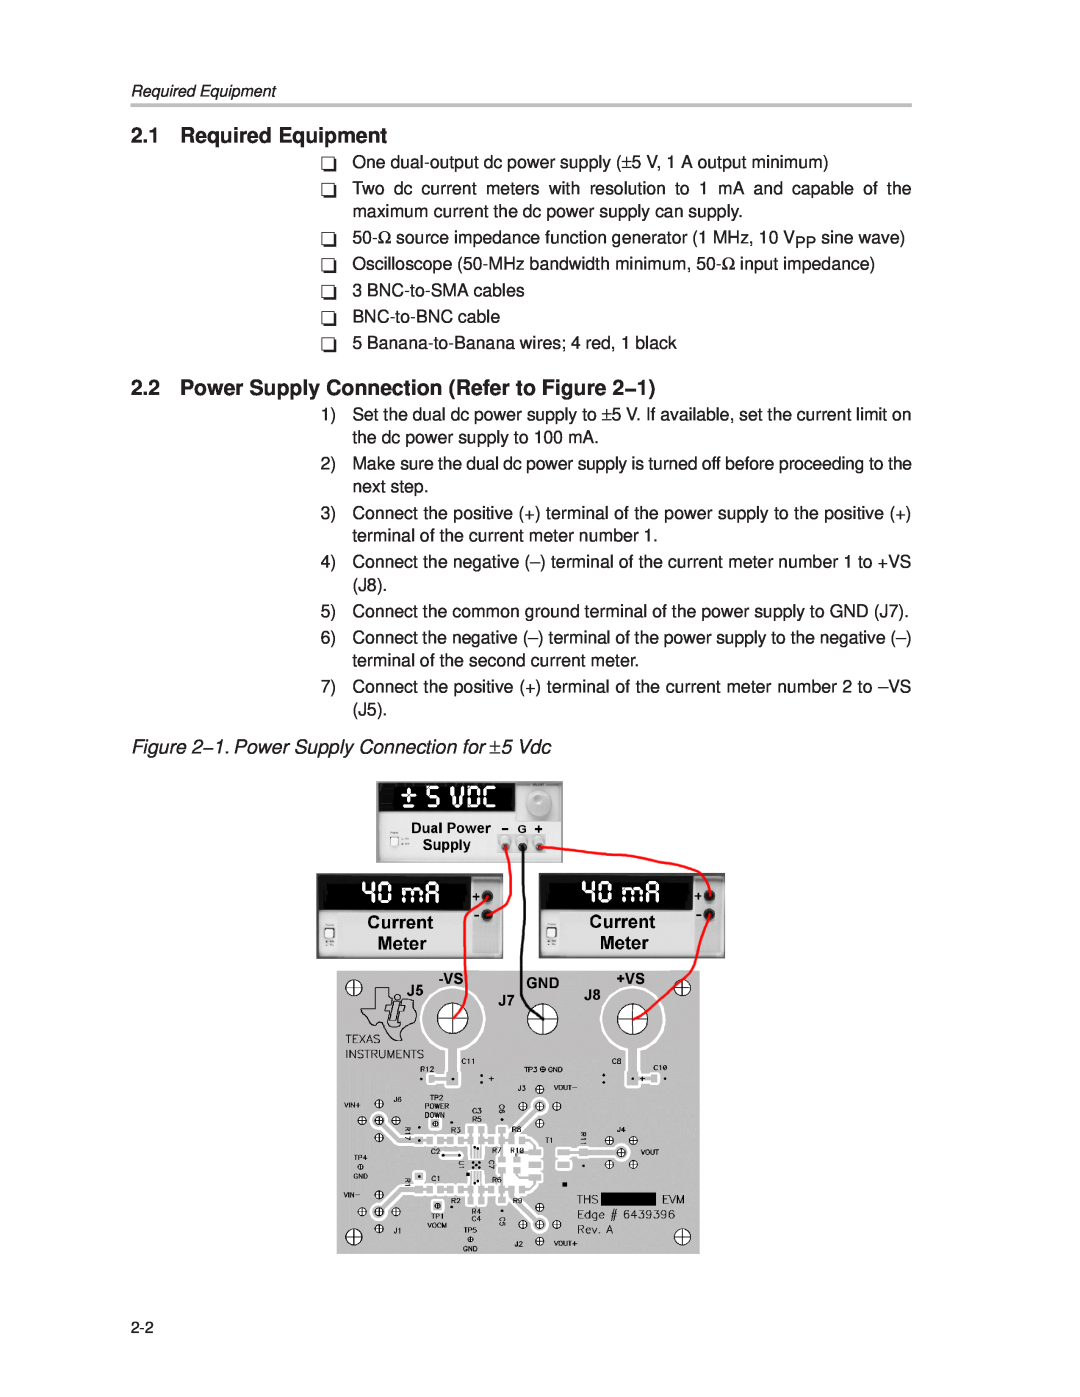 Texas Instruments THS4503EVM manual 2.1Required Equipment, 2.2Power Supply Connection Refer to −1 